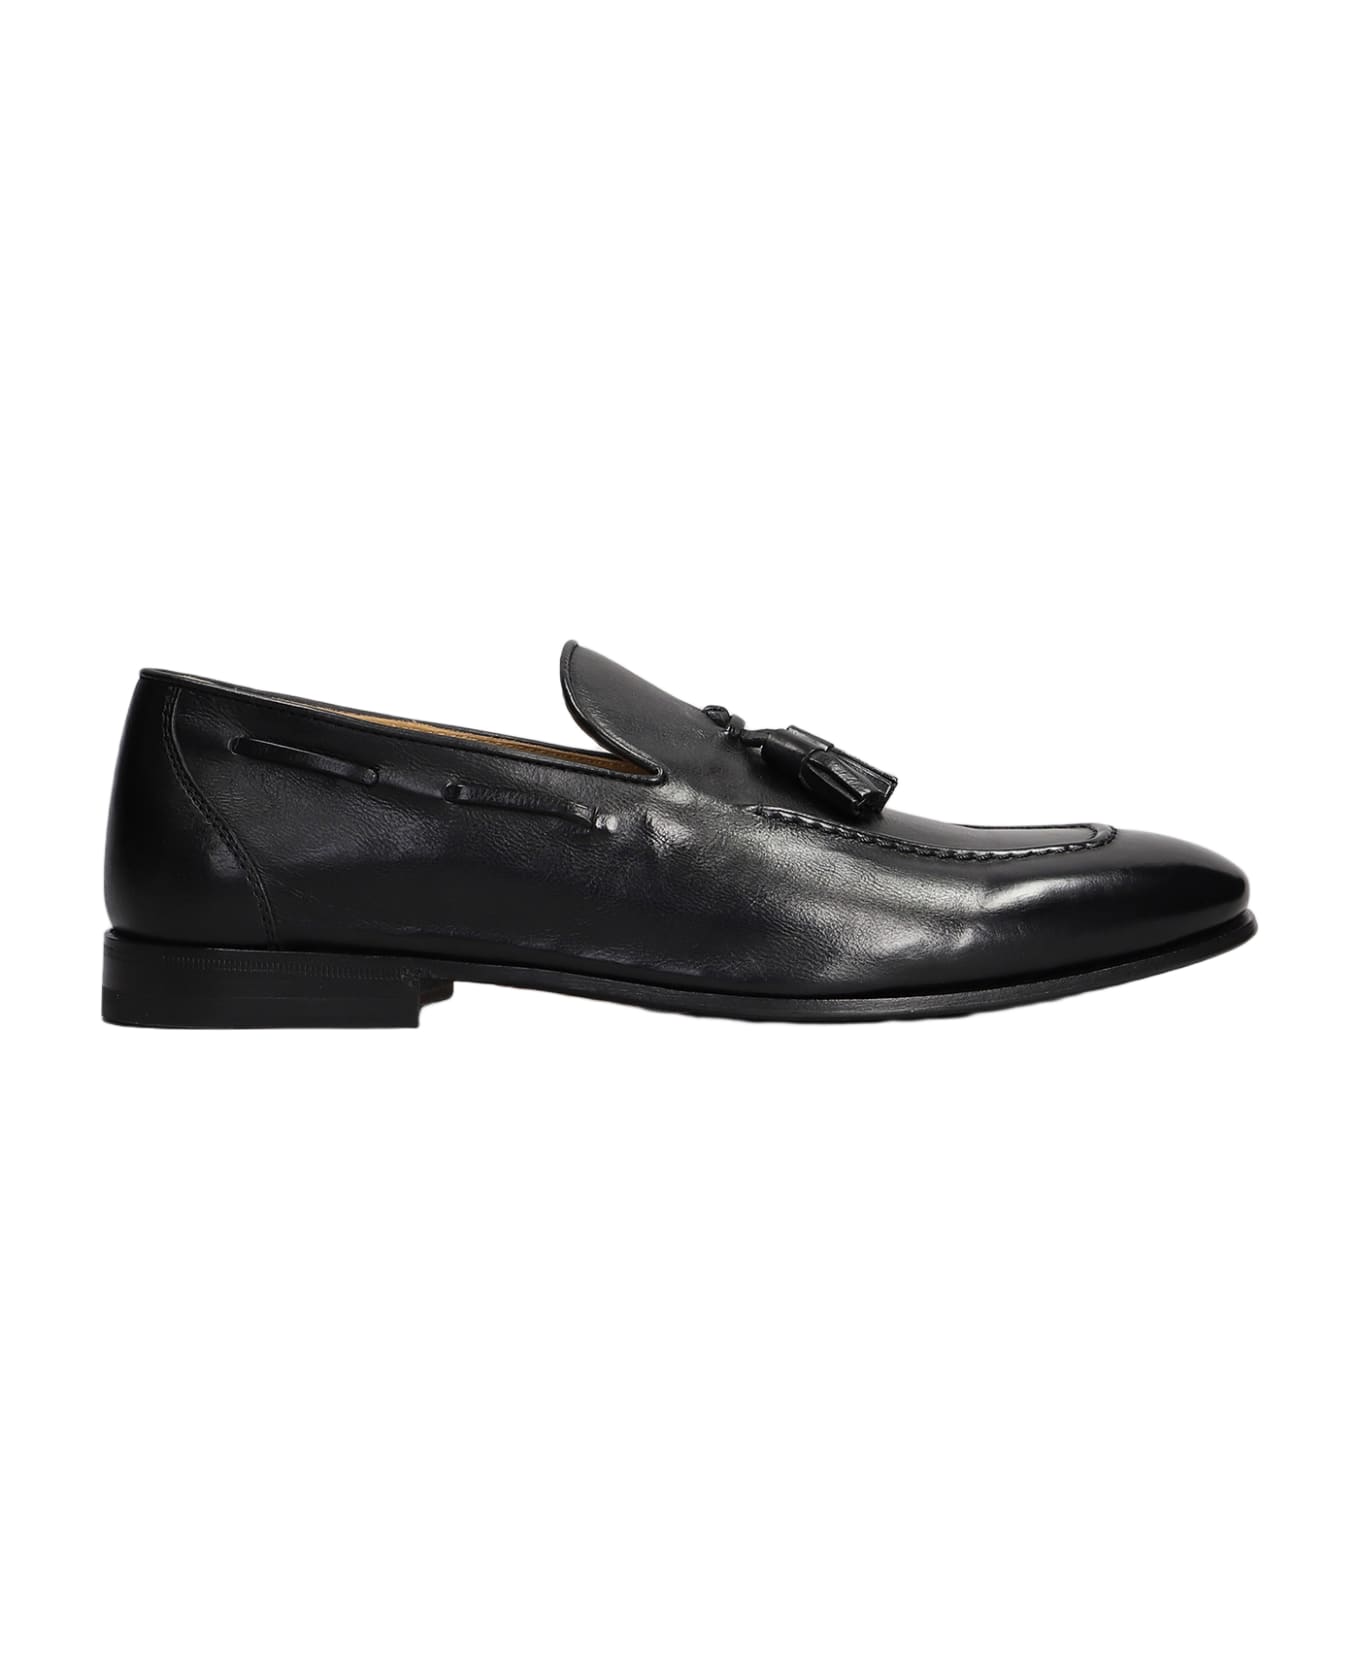 Henderson Baracco Loafers In Black Leather - black ローファー＆デッキシューズ